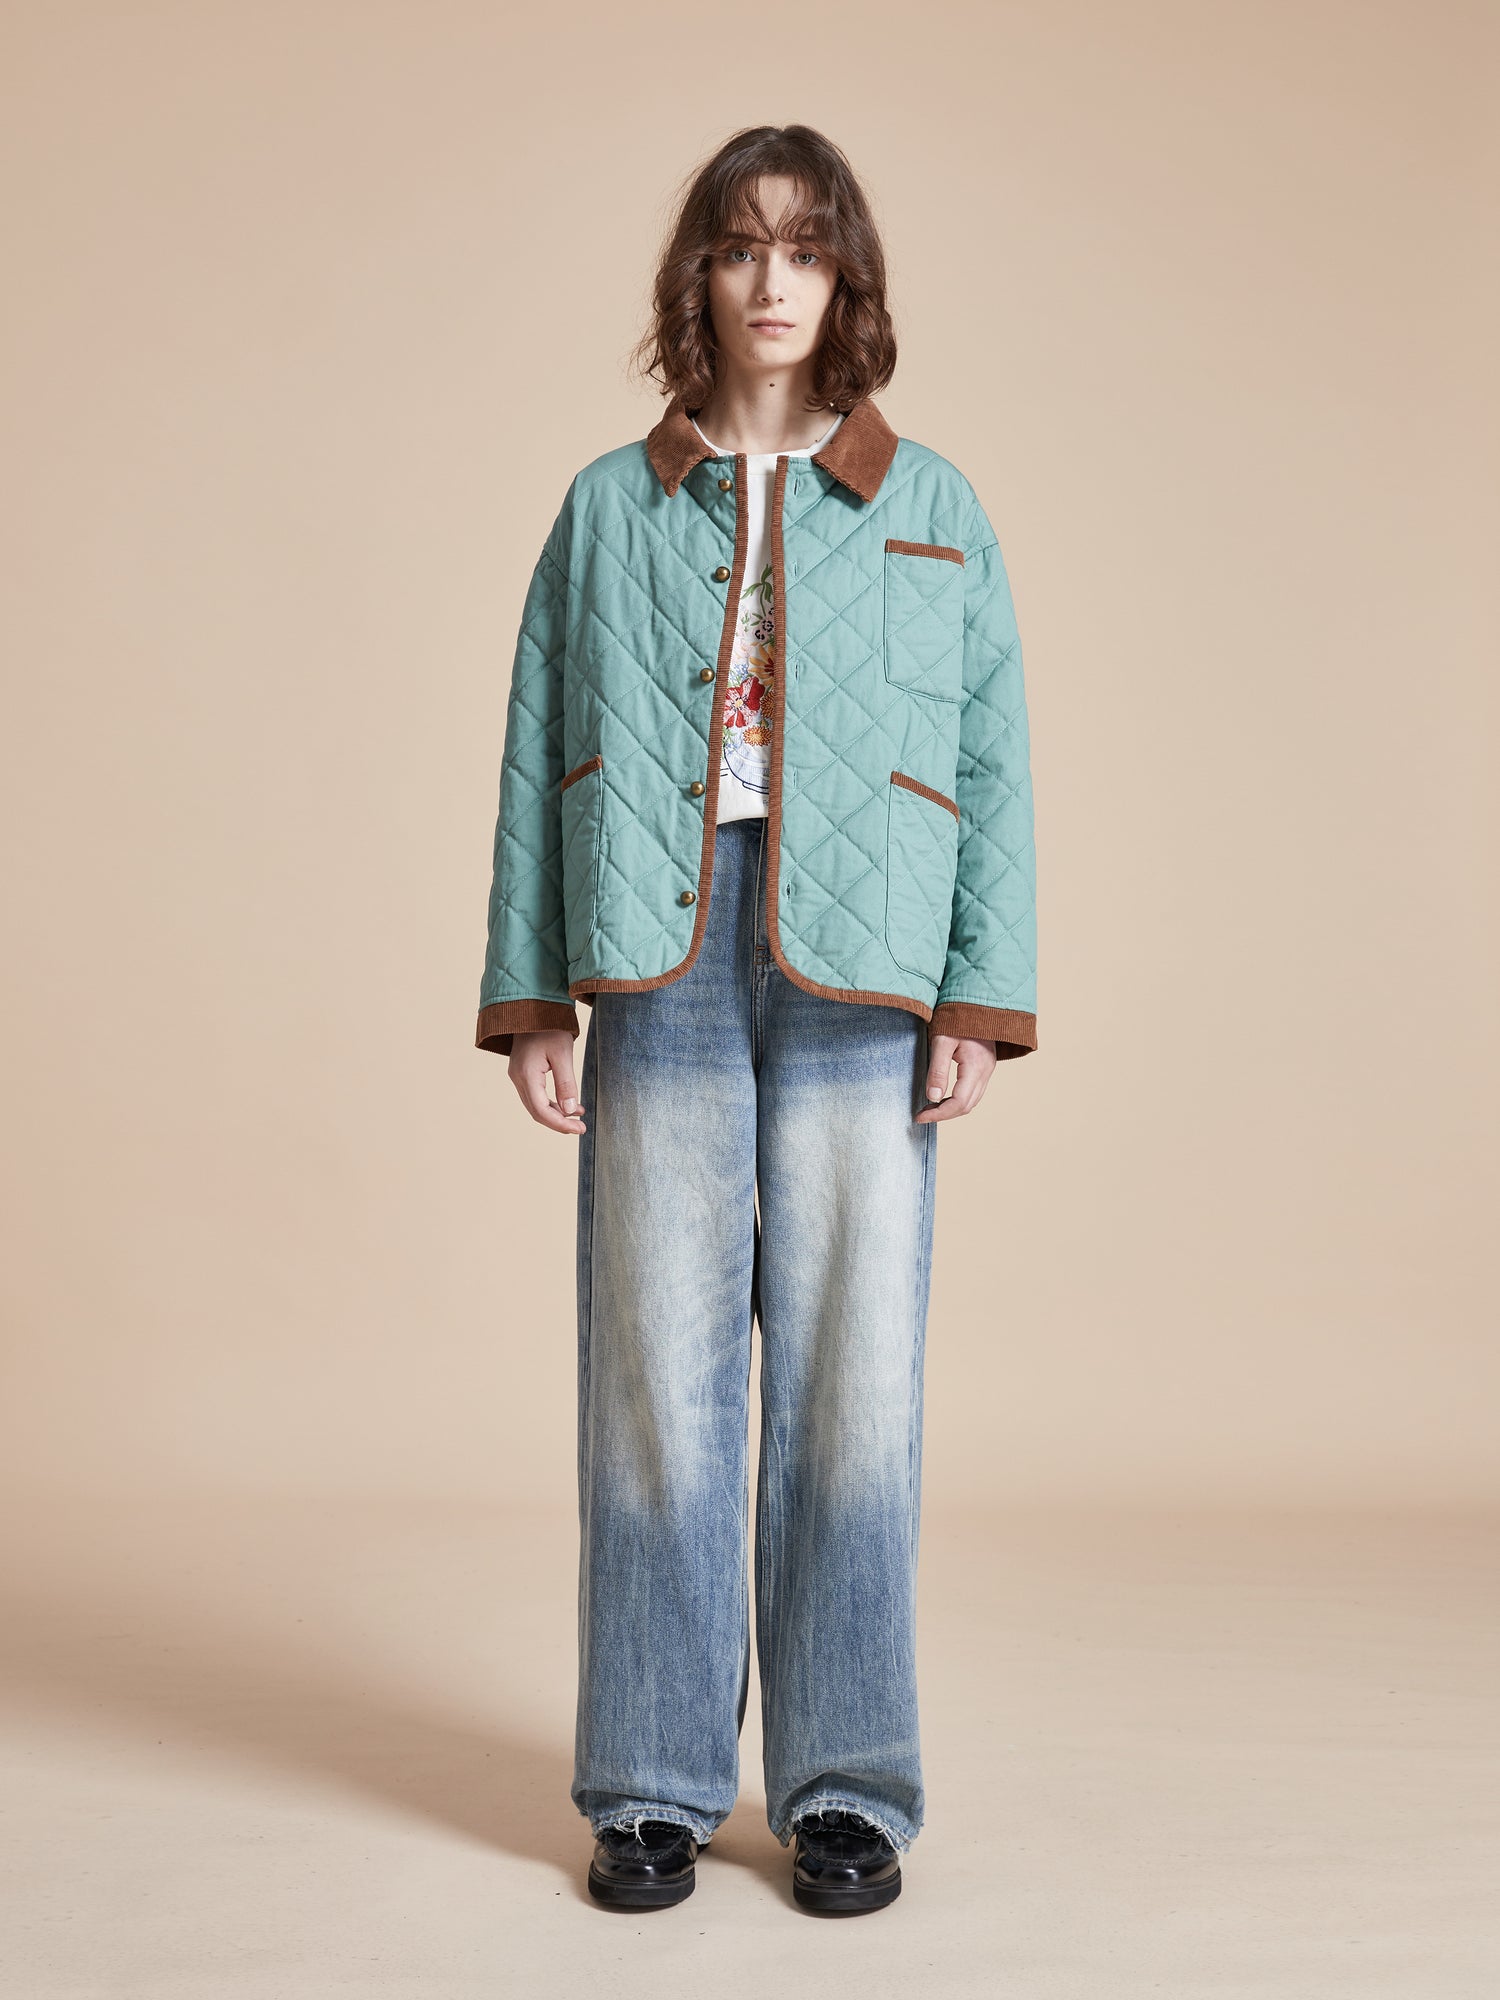 A woman wearing a Found Kashmir Meadow Quilt Jacket and jeans.